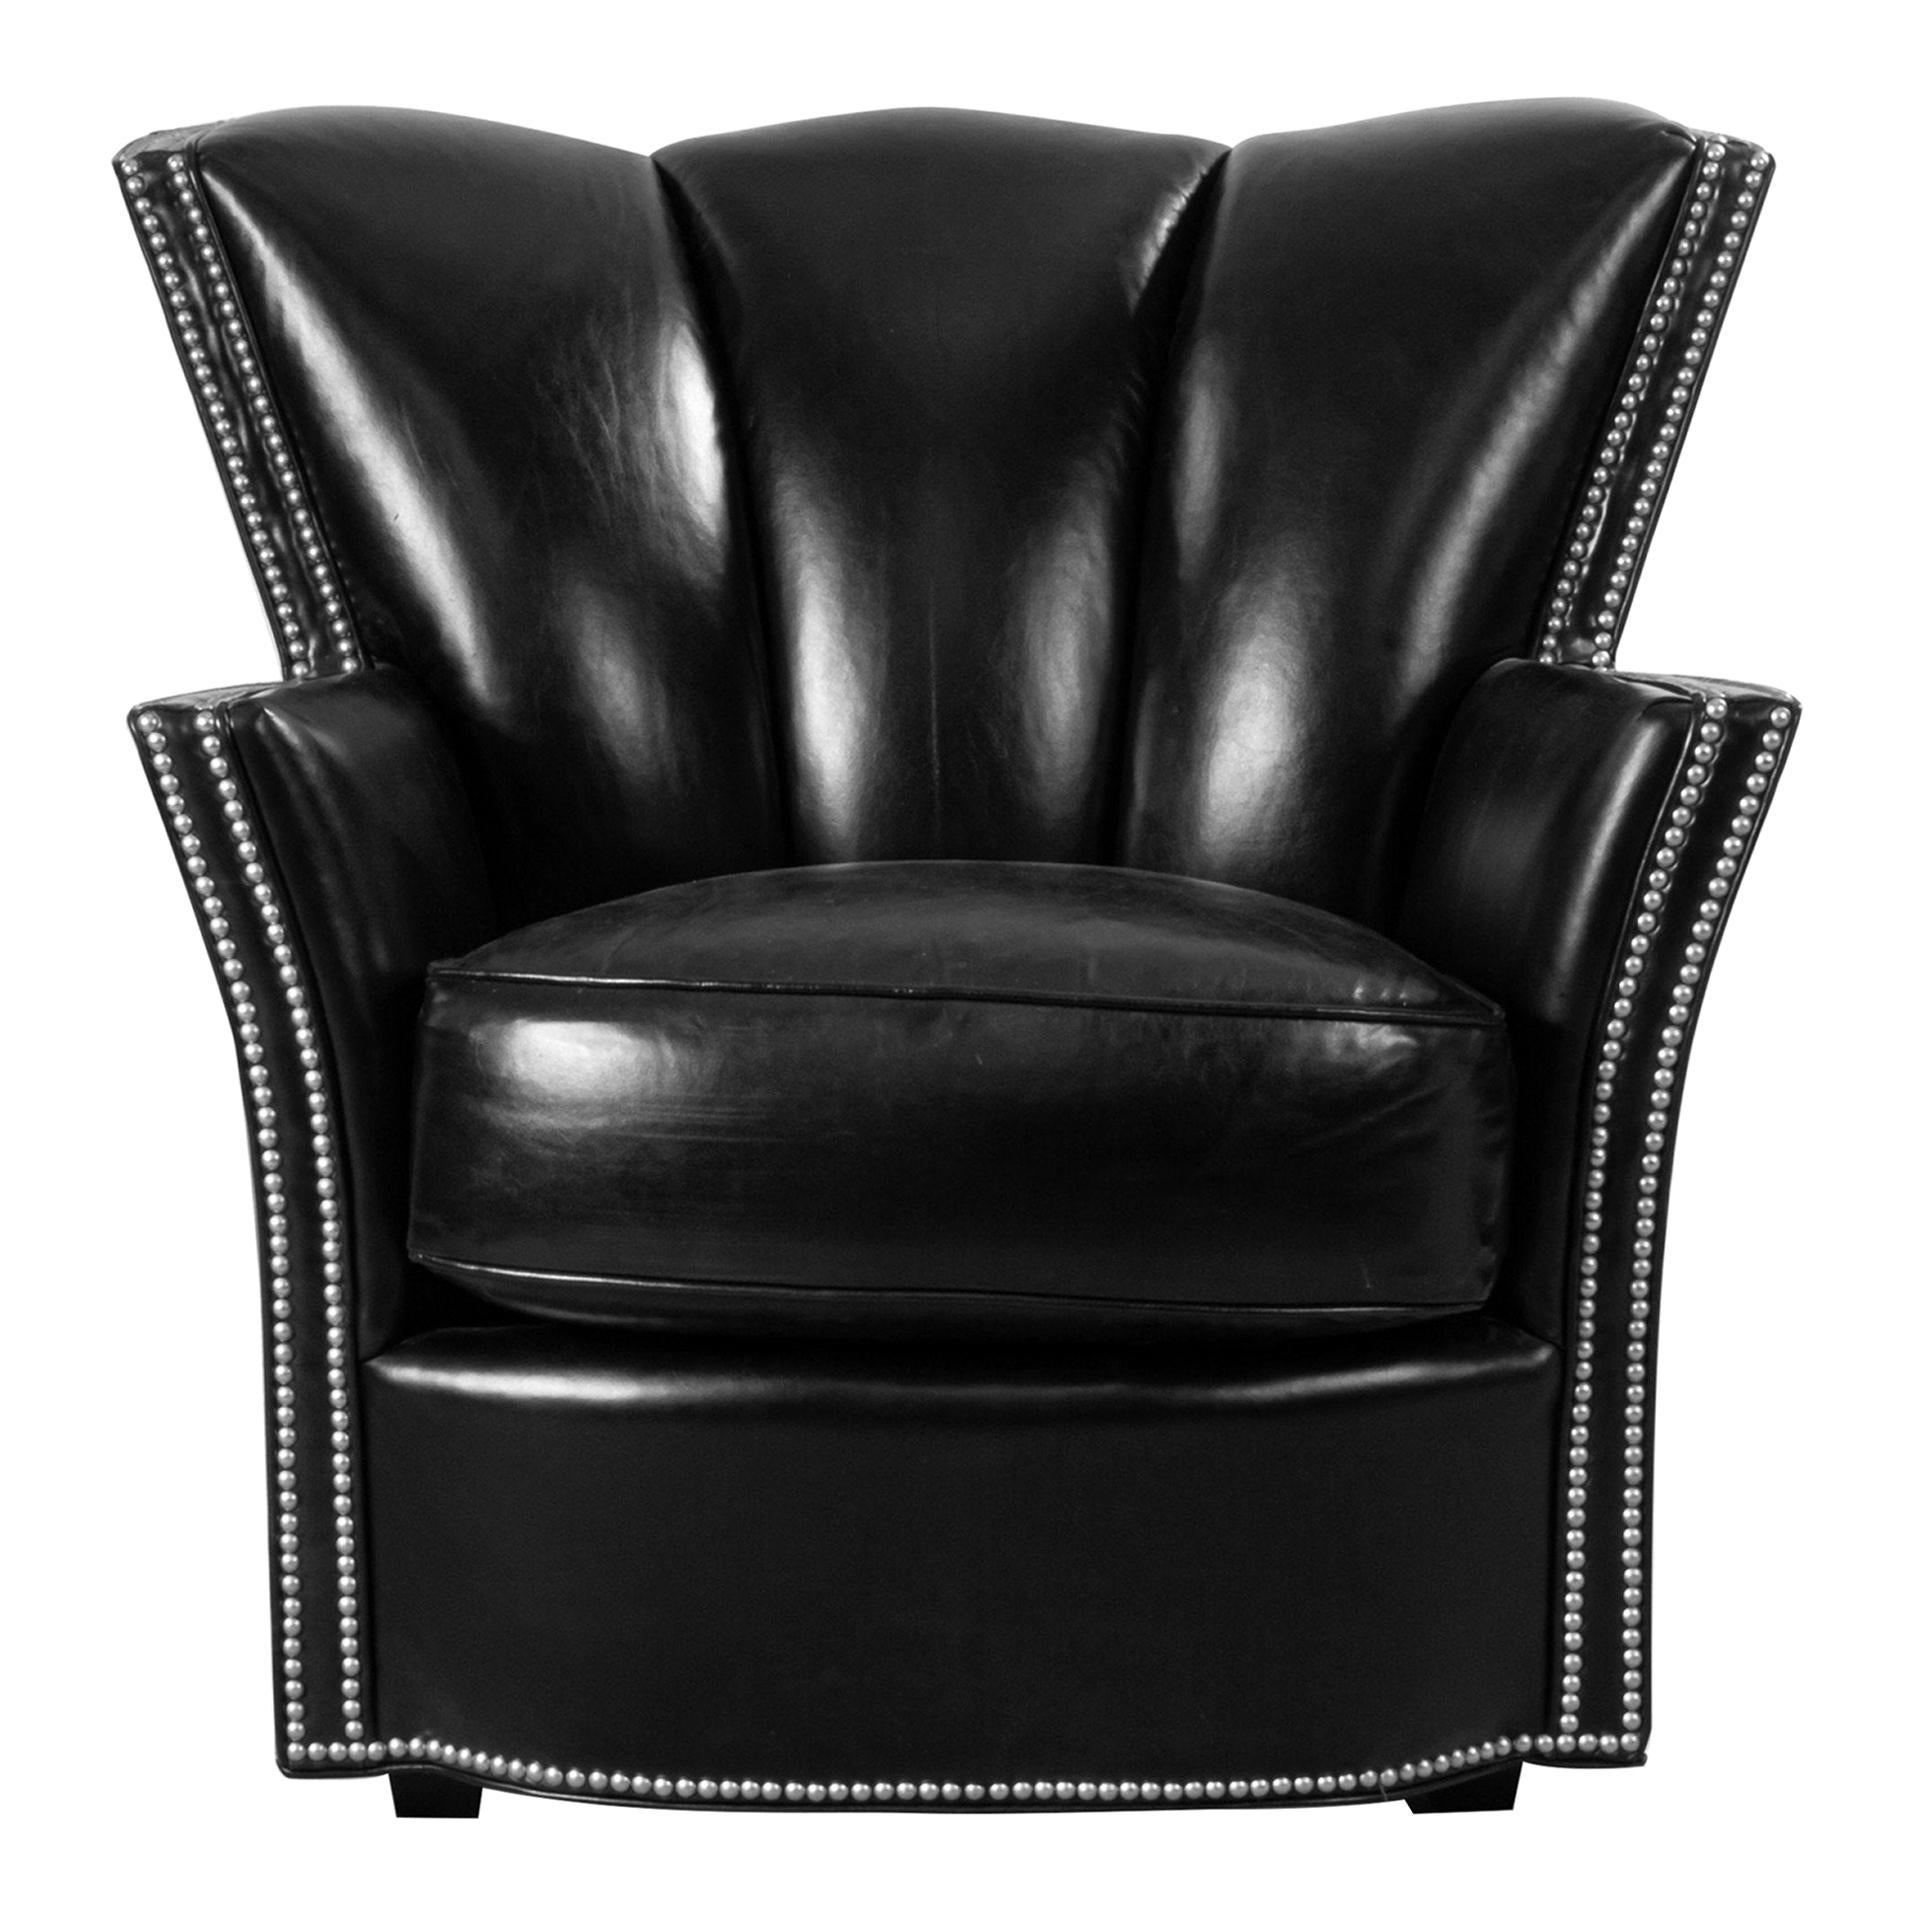 Pair of Swaim Contemporary Black Leather Club Chairs